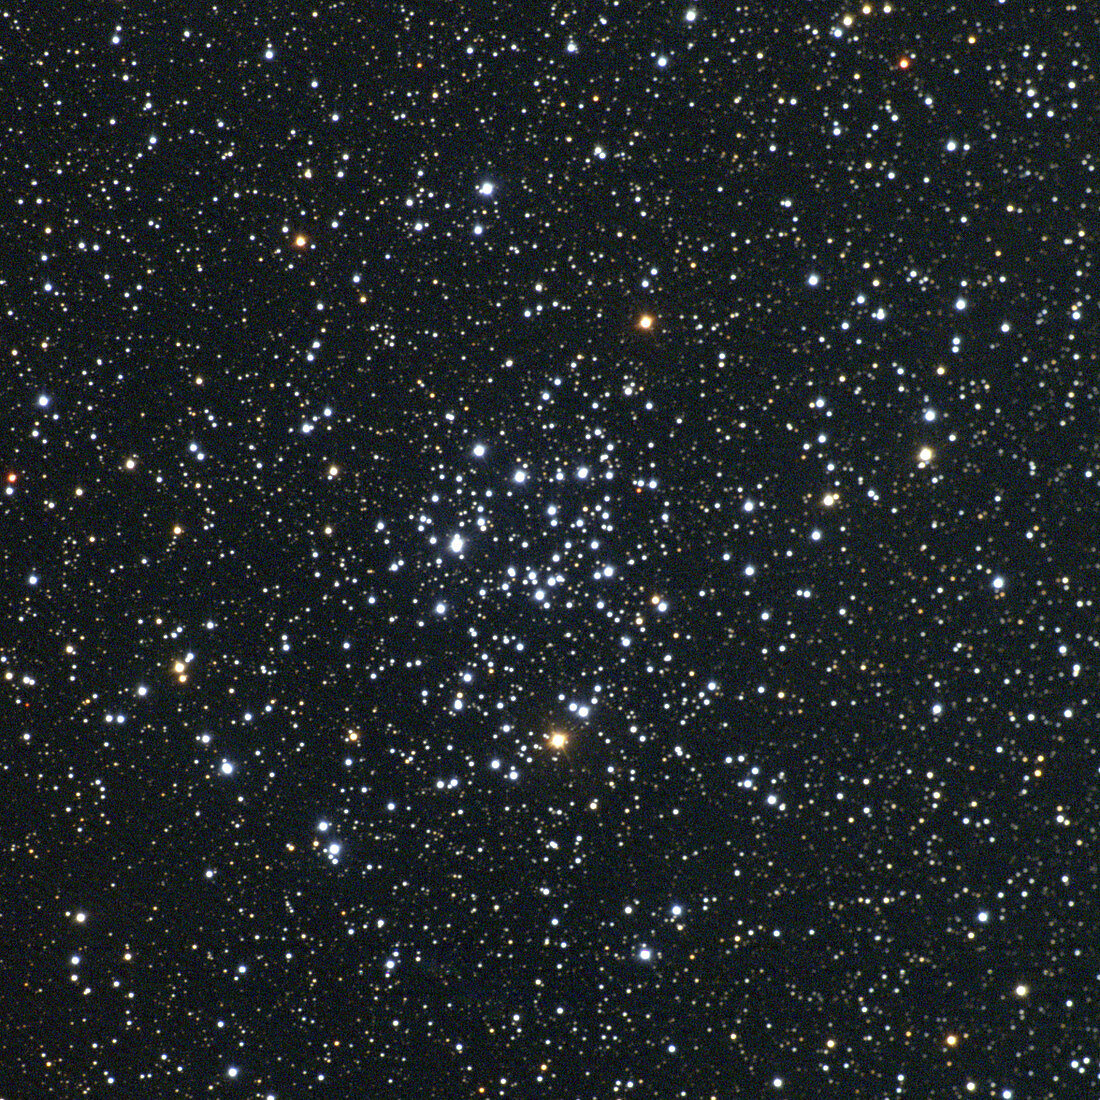 Open star cluster M50